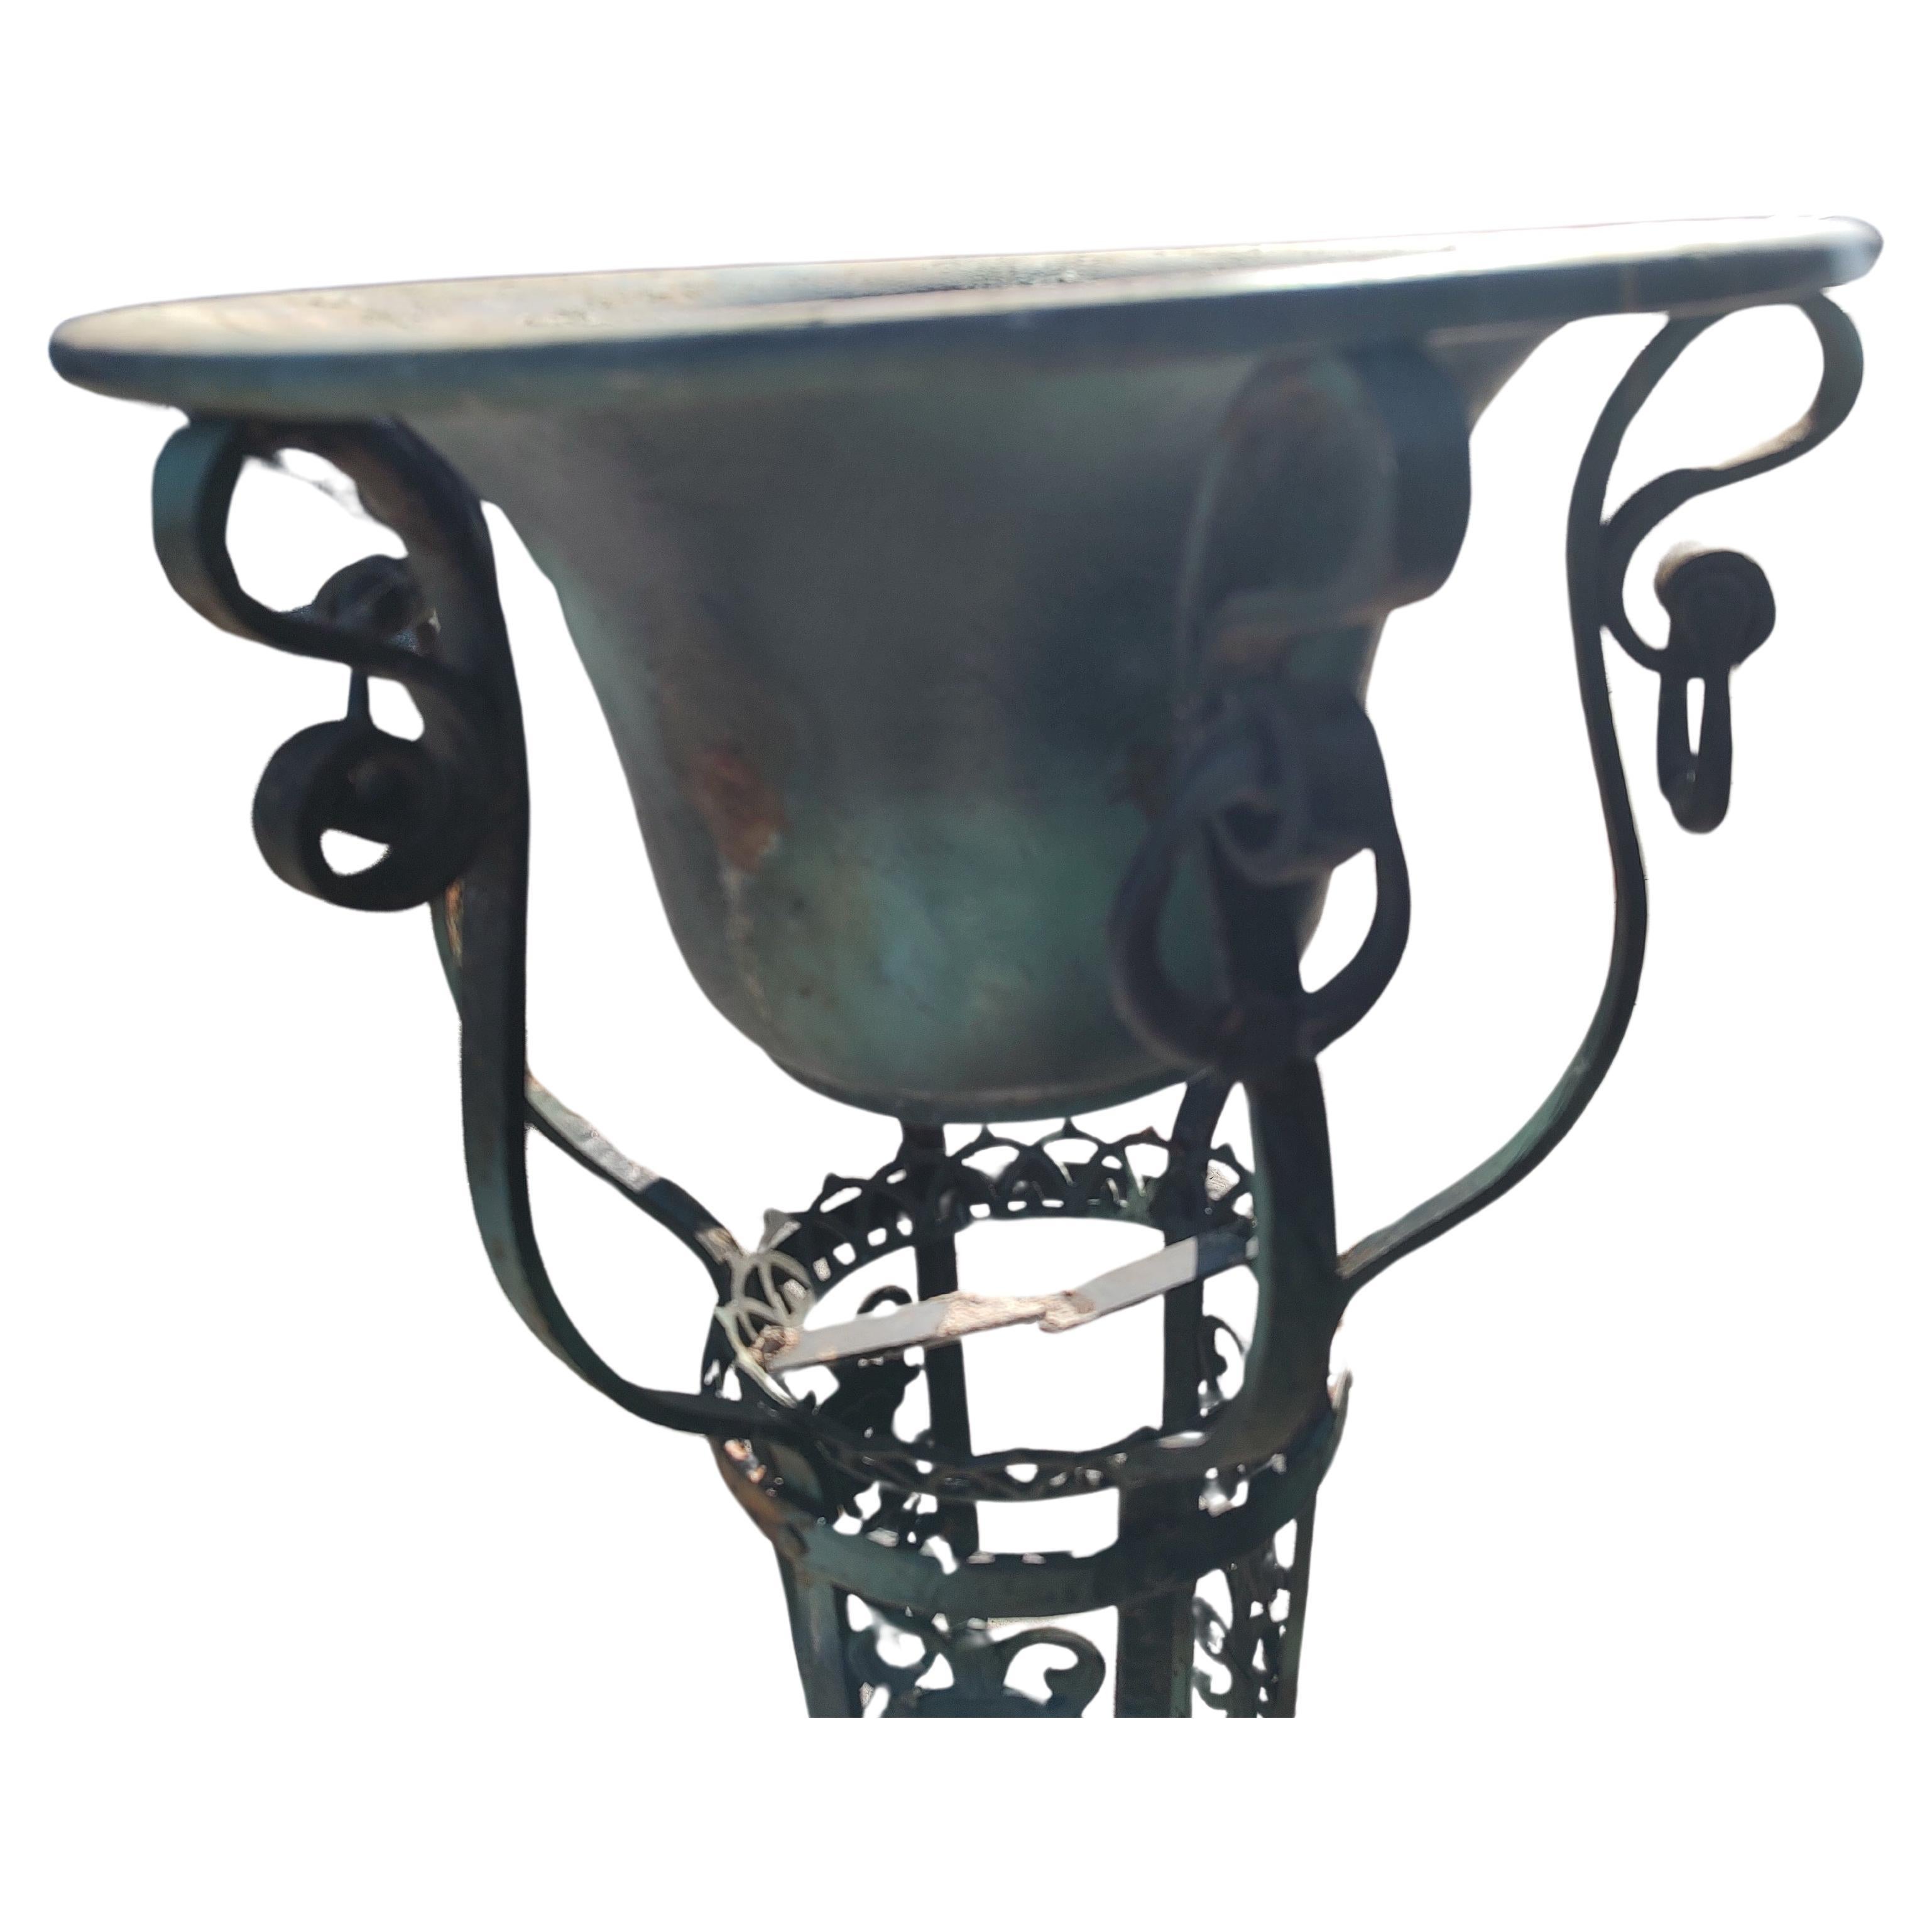 Art Deco Fancy Iron with Copper Pot Plant Stand C1925 For Sale 2